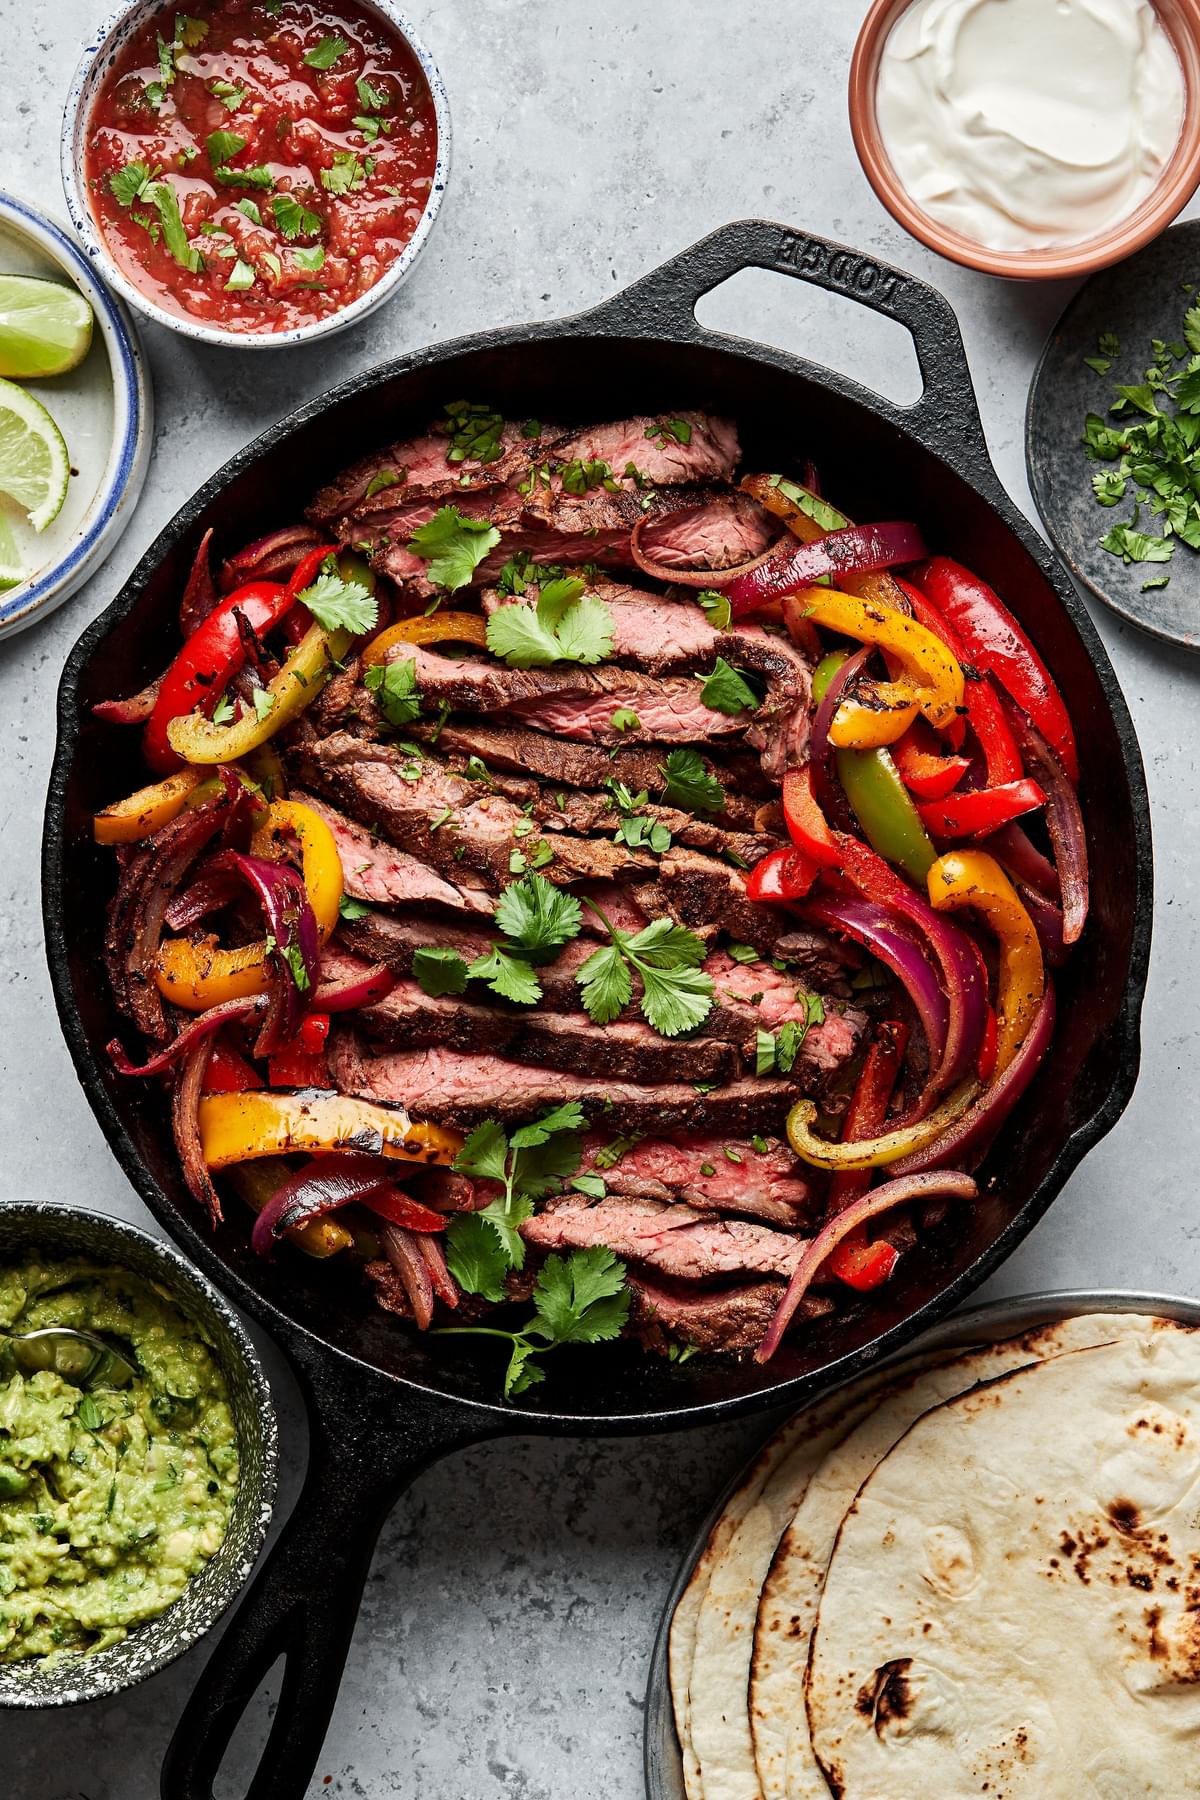 steak fajitas and bell peppers in cast iron skillet sprinkled with cilantro surrounded by salsa, guacamole and corn tortillas